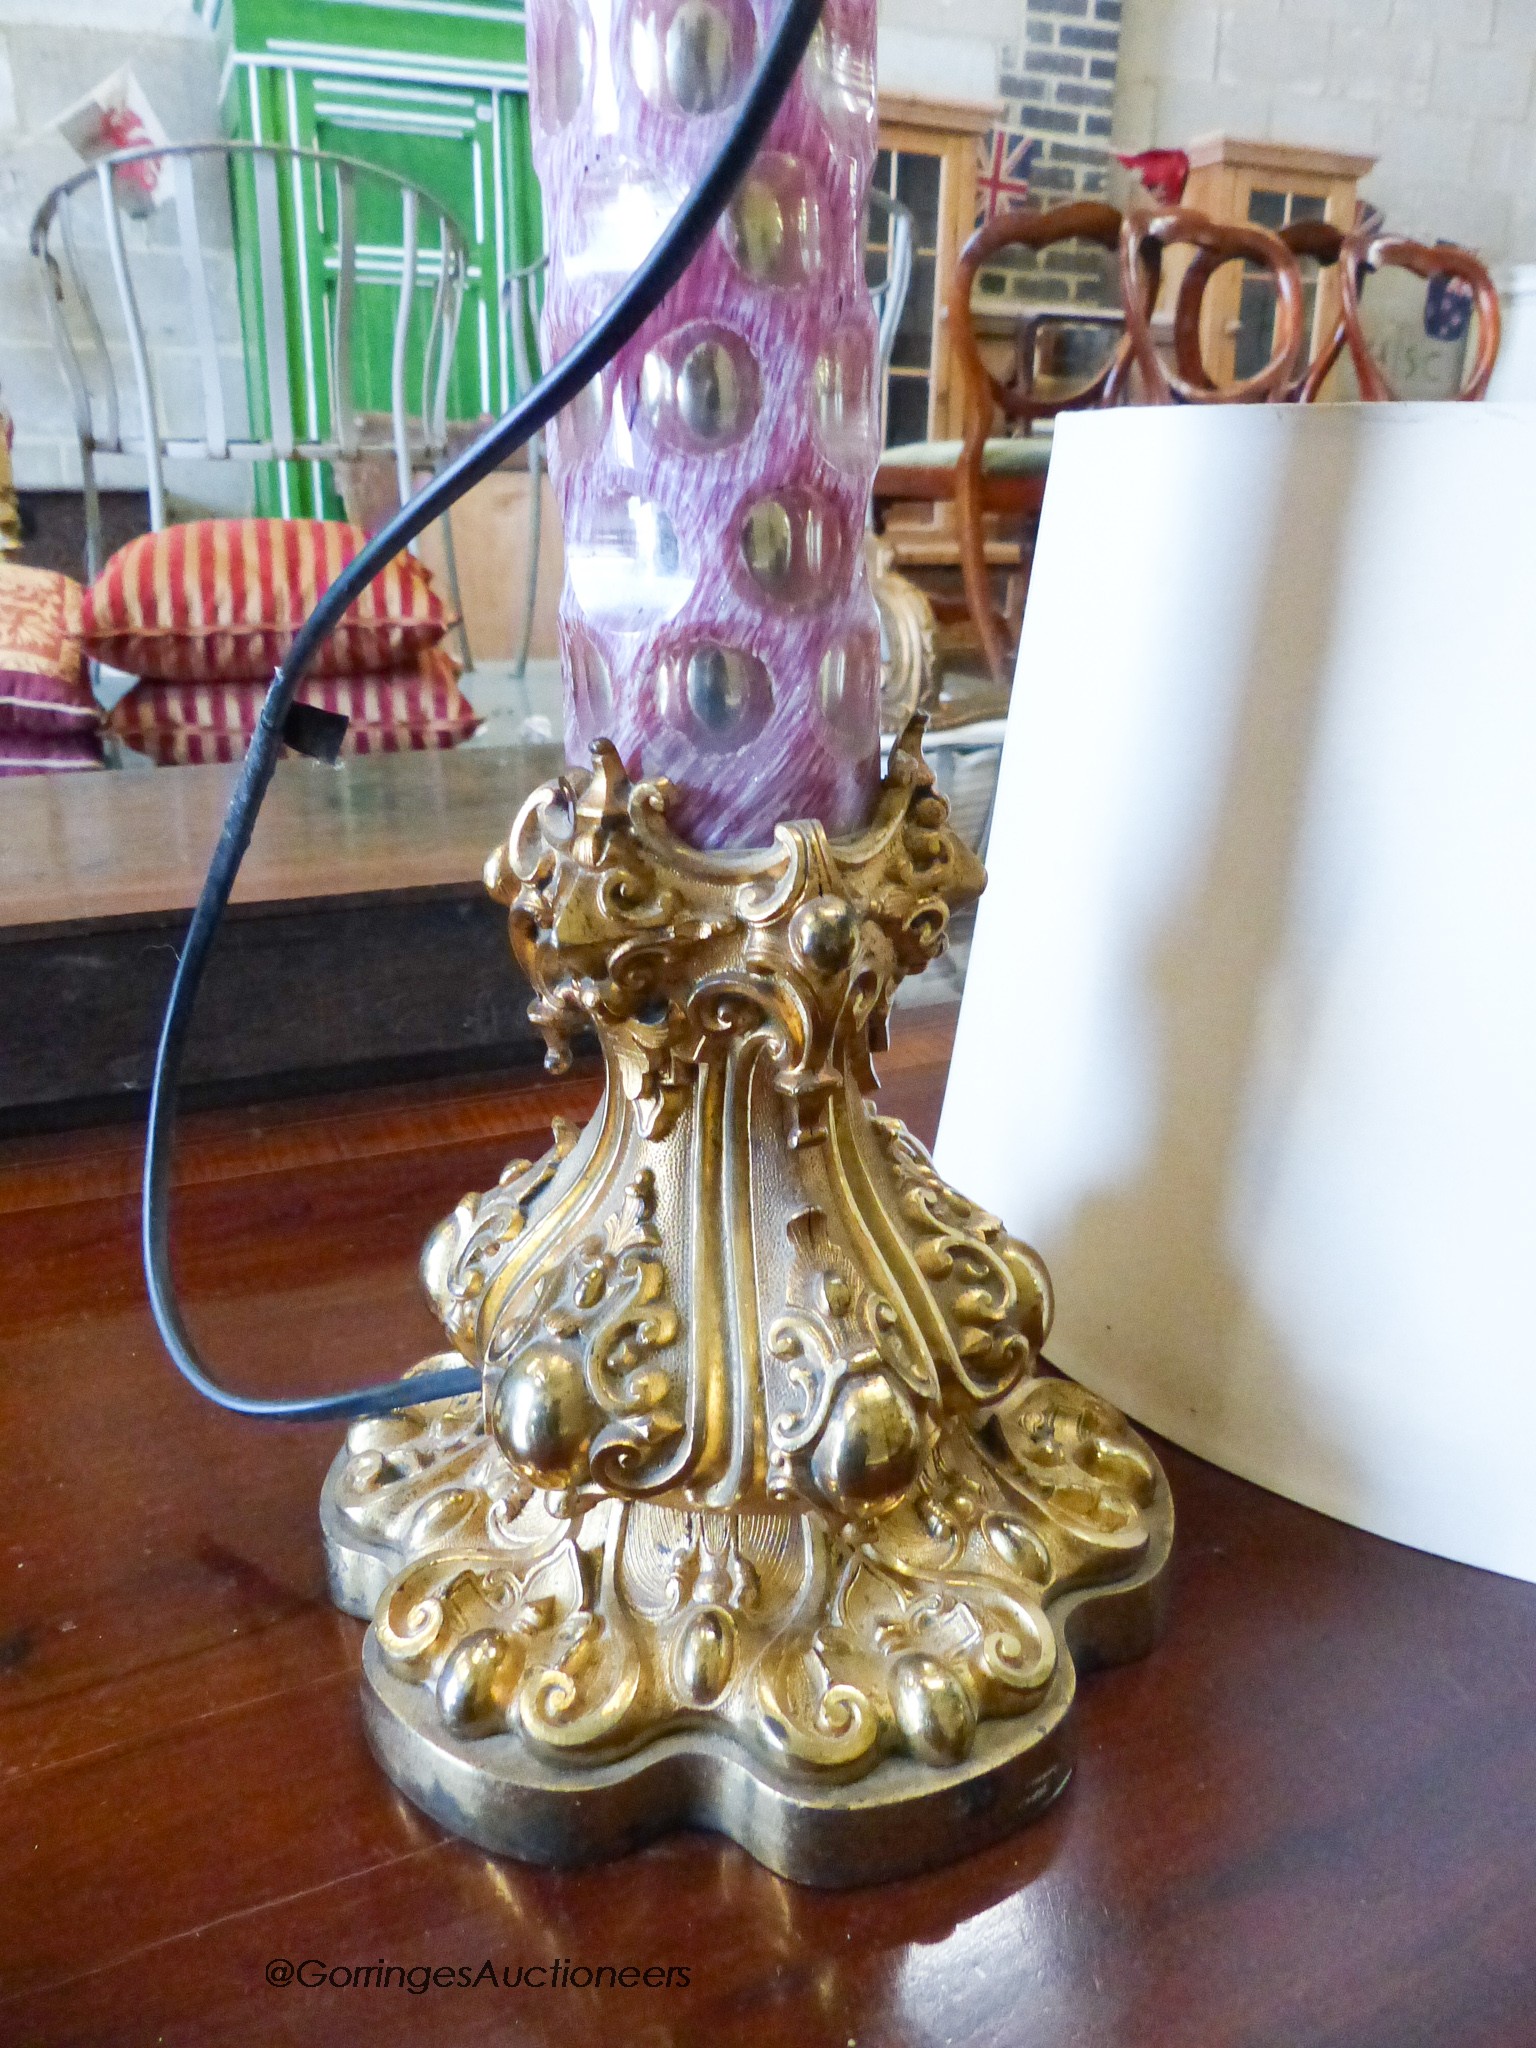 A 19th century ormolu and Bohemian glass standard lamp, height 112cm - Image 2 of 4